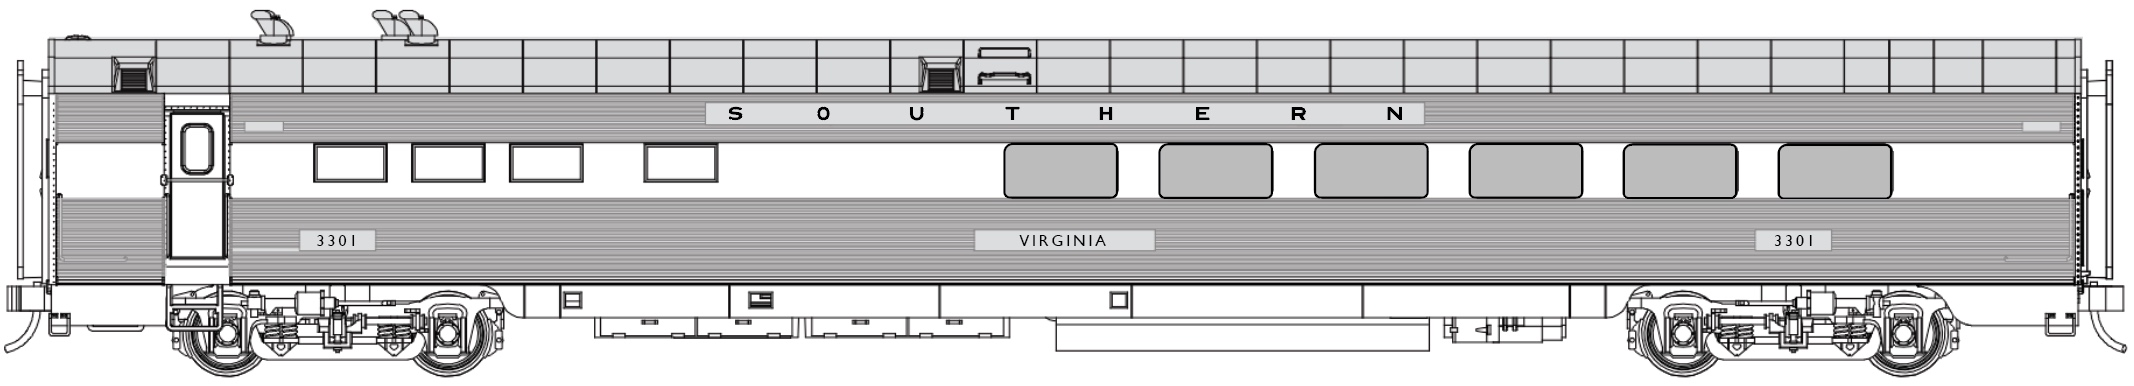 N Scale - RailSmith - 754009 - Passenger Car, Pullman, Fluted, Diner - Southern - Virginia